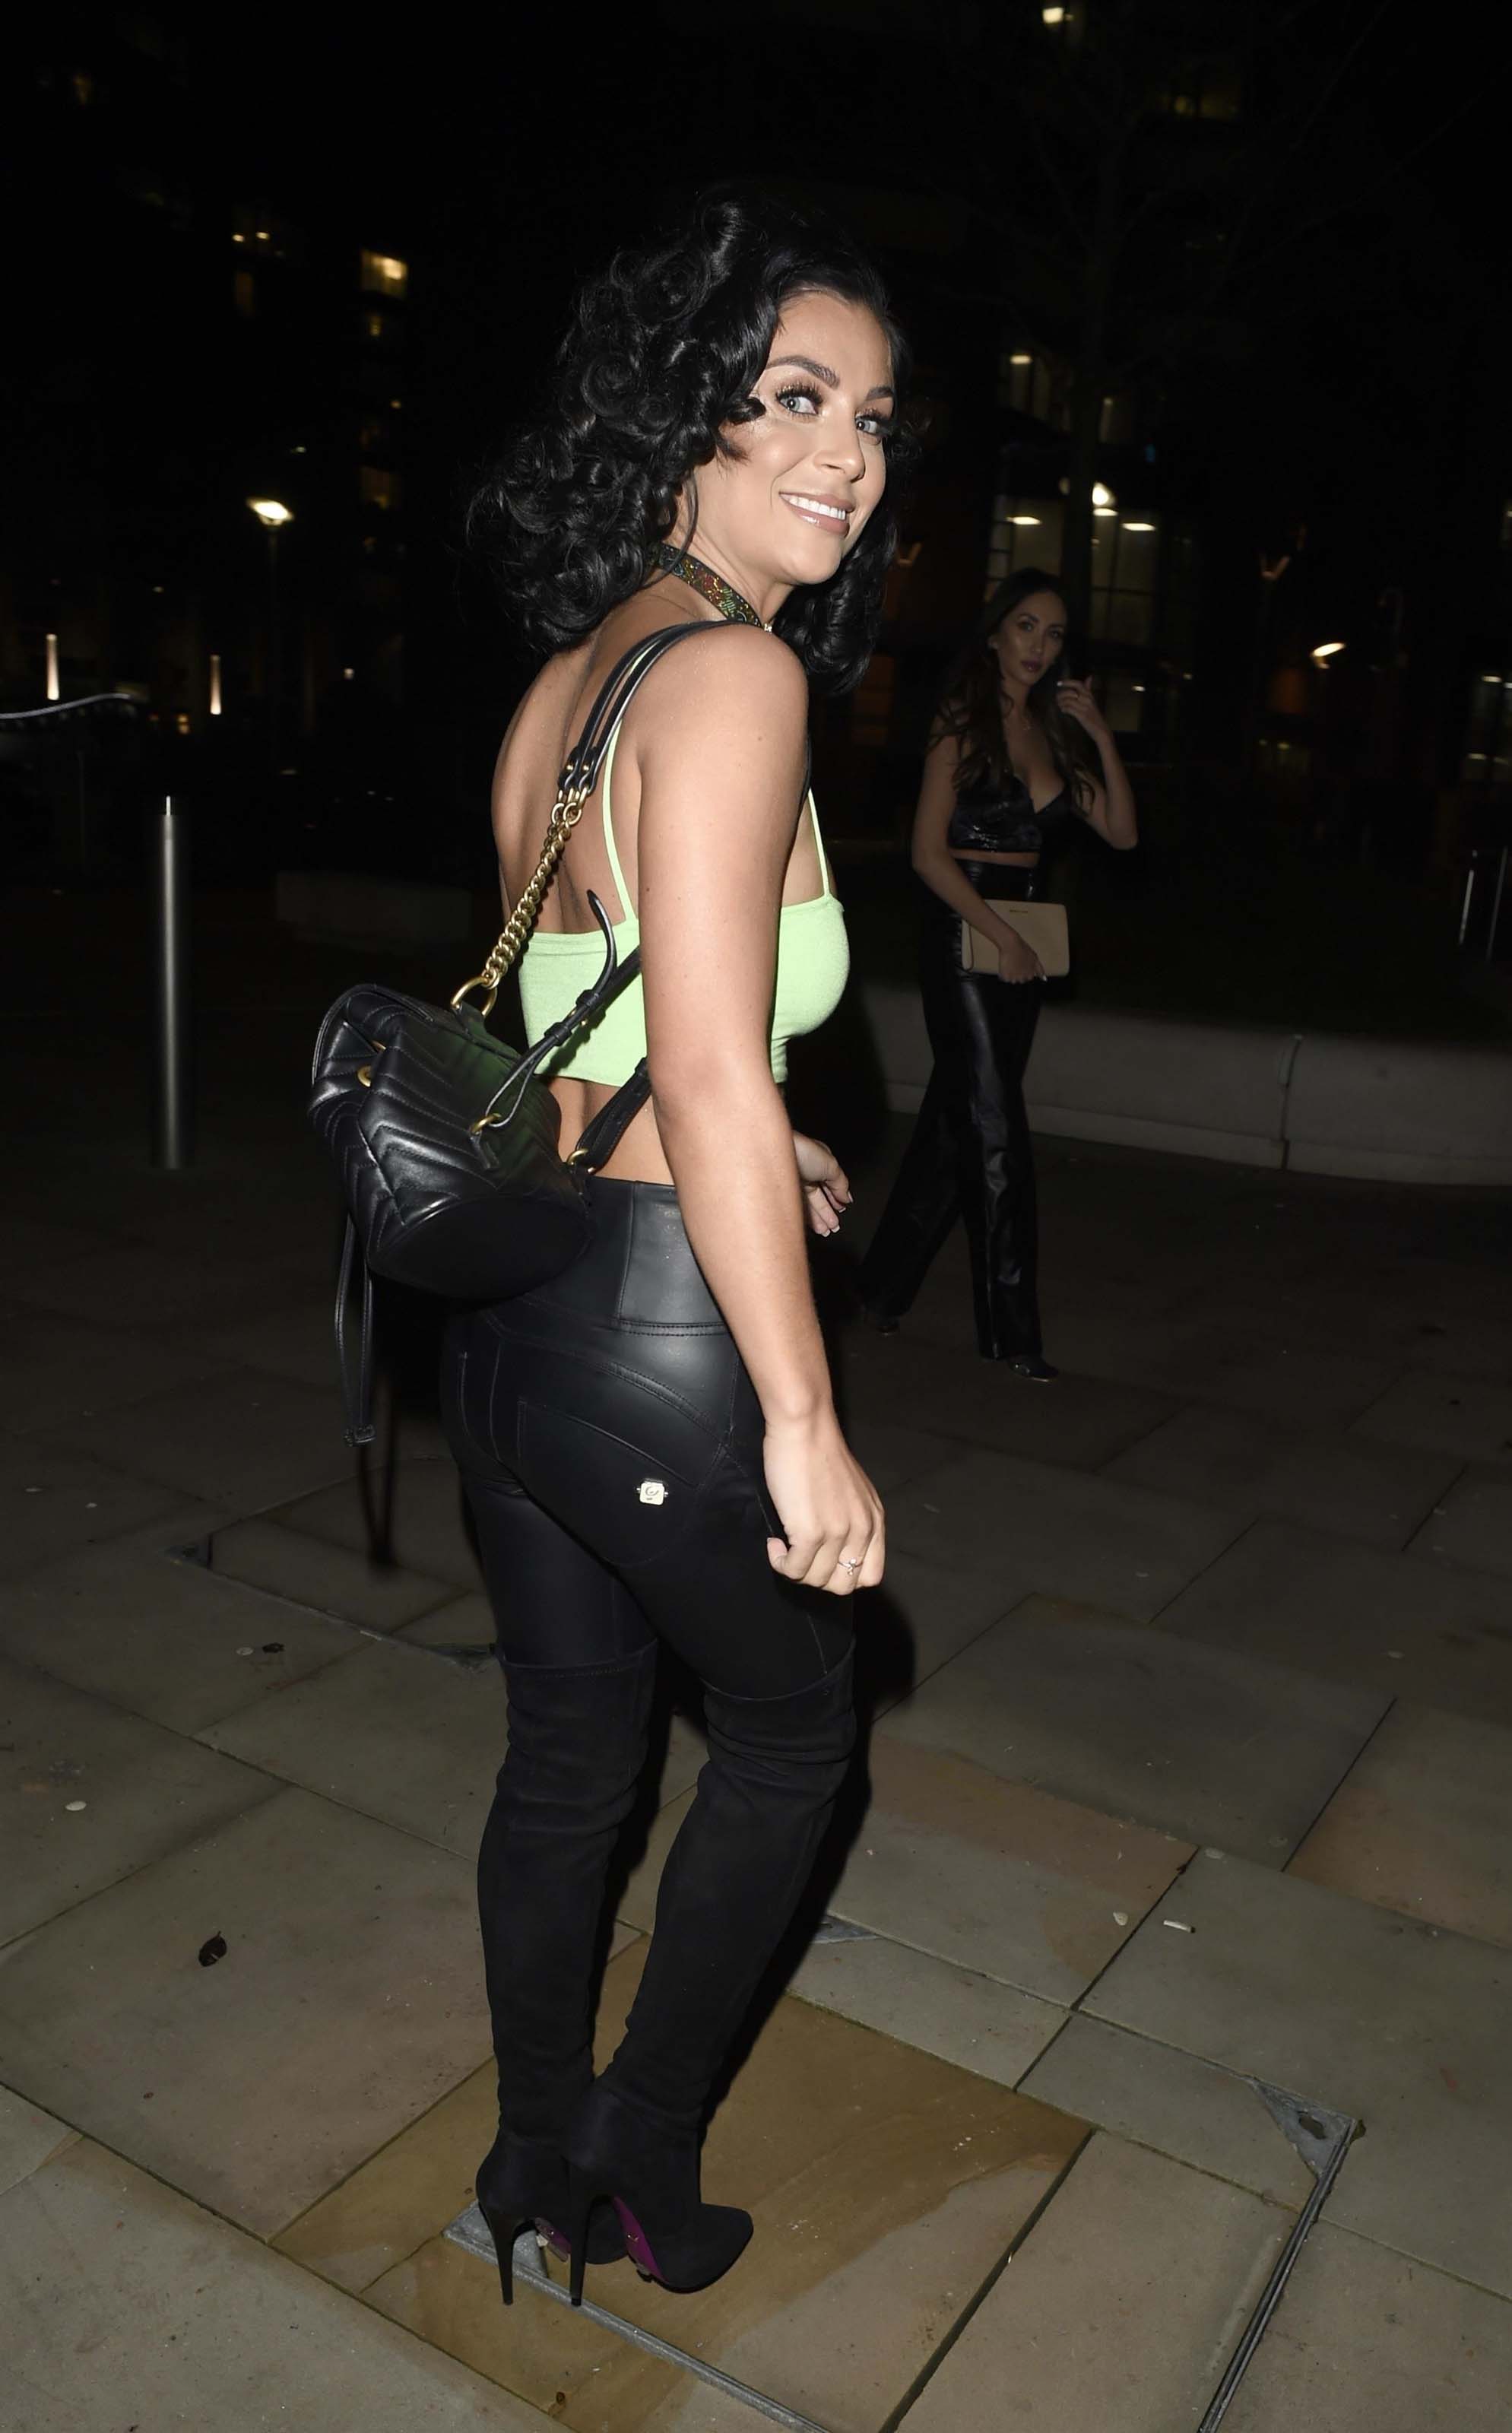 Cally Jane Beech attends The Nuage Event